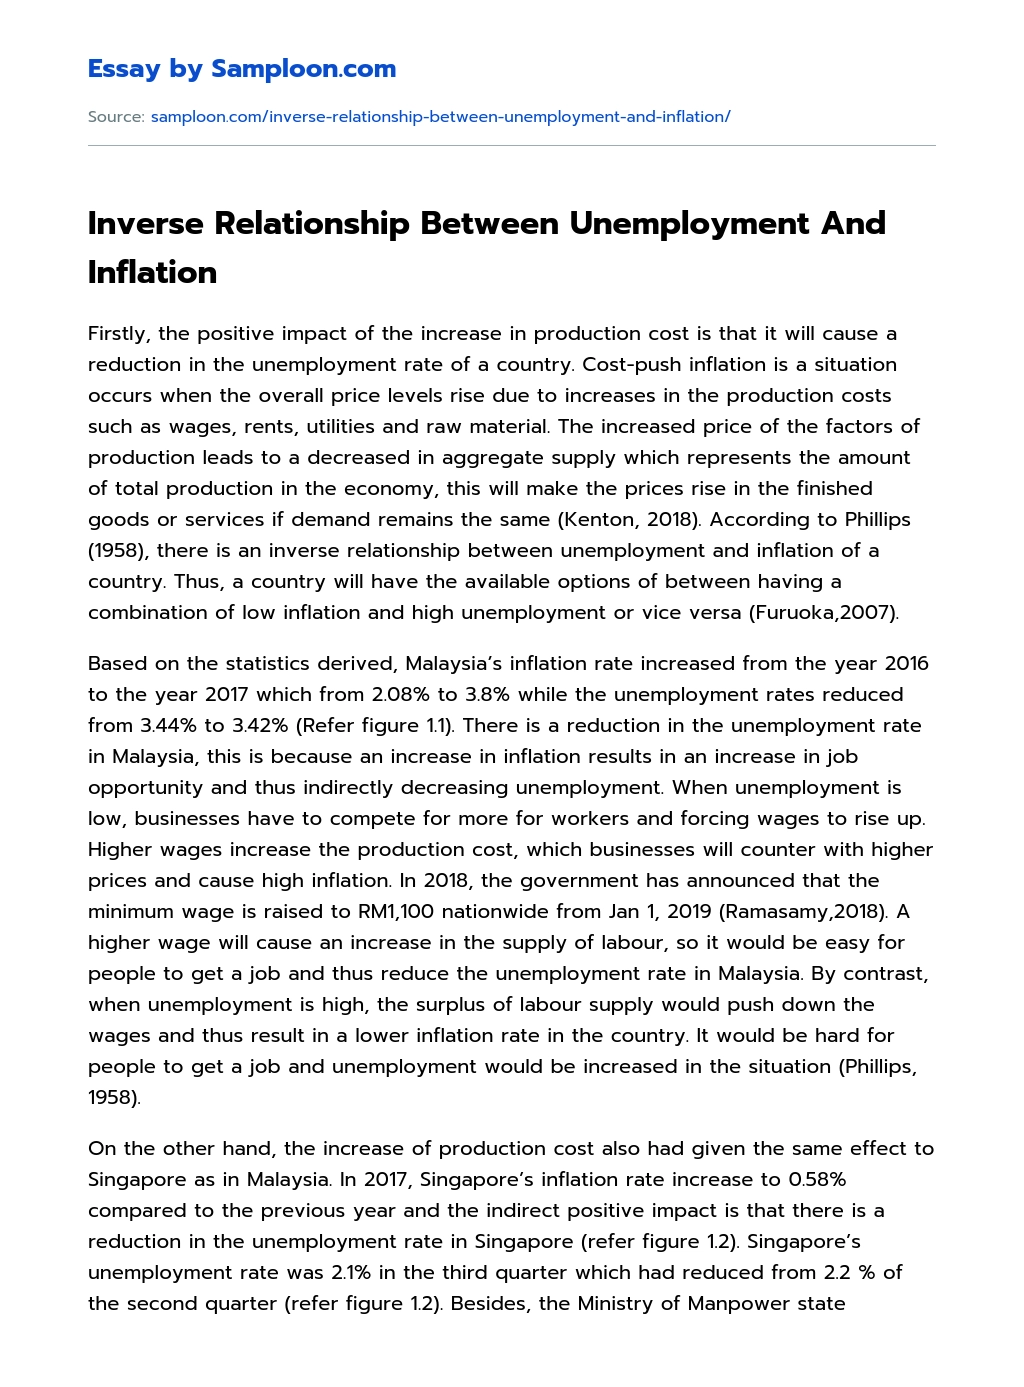 Inverse Relationship Between Unemployment And Inflation essay